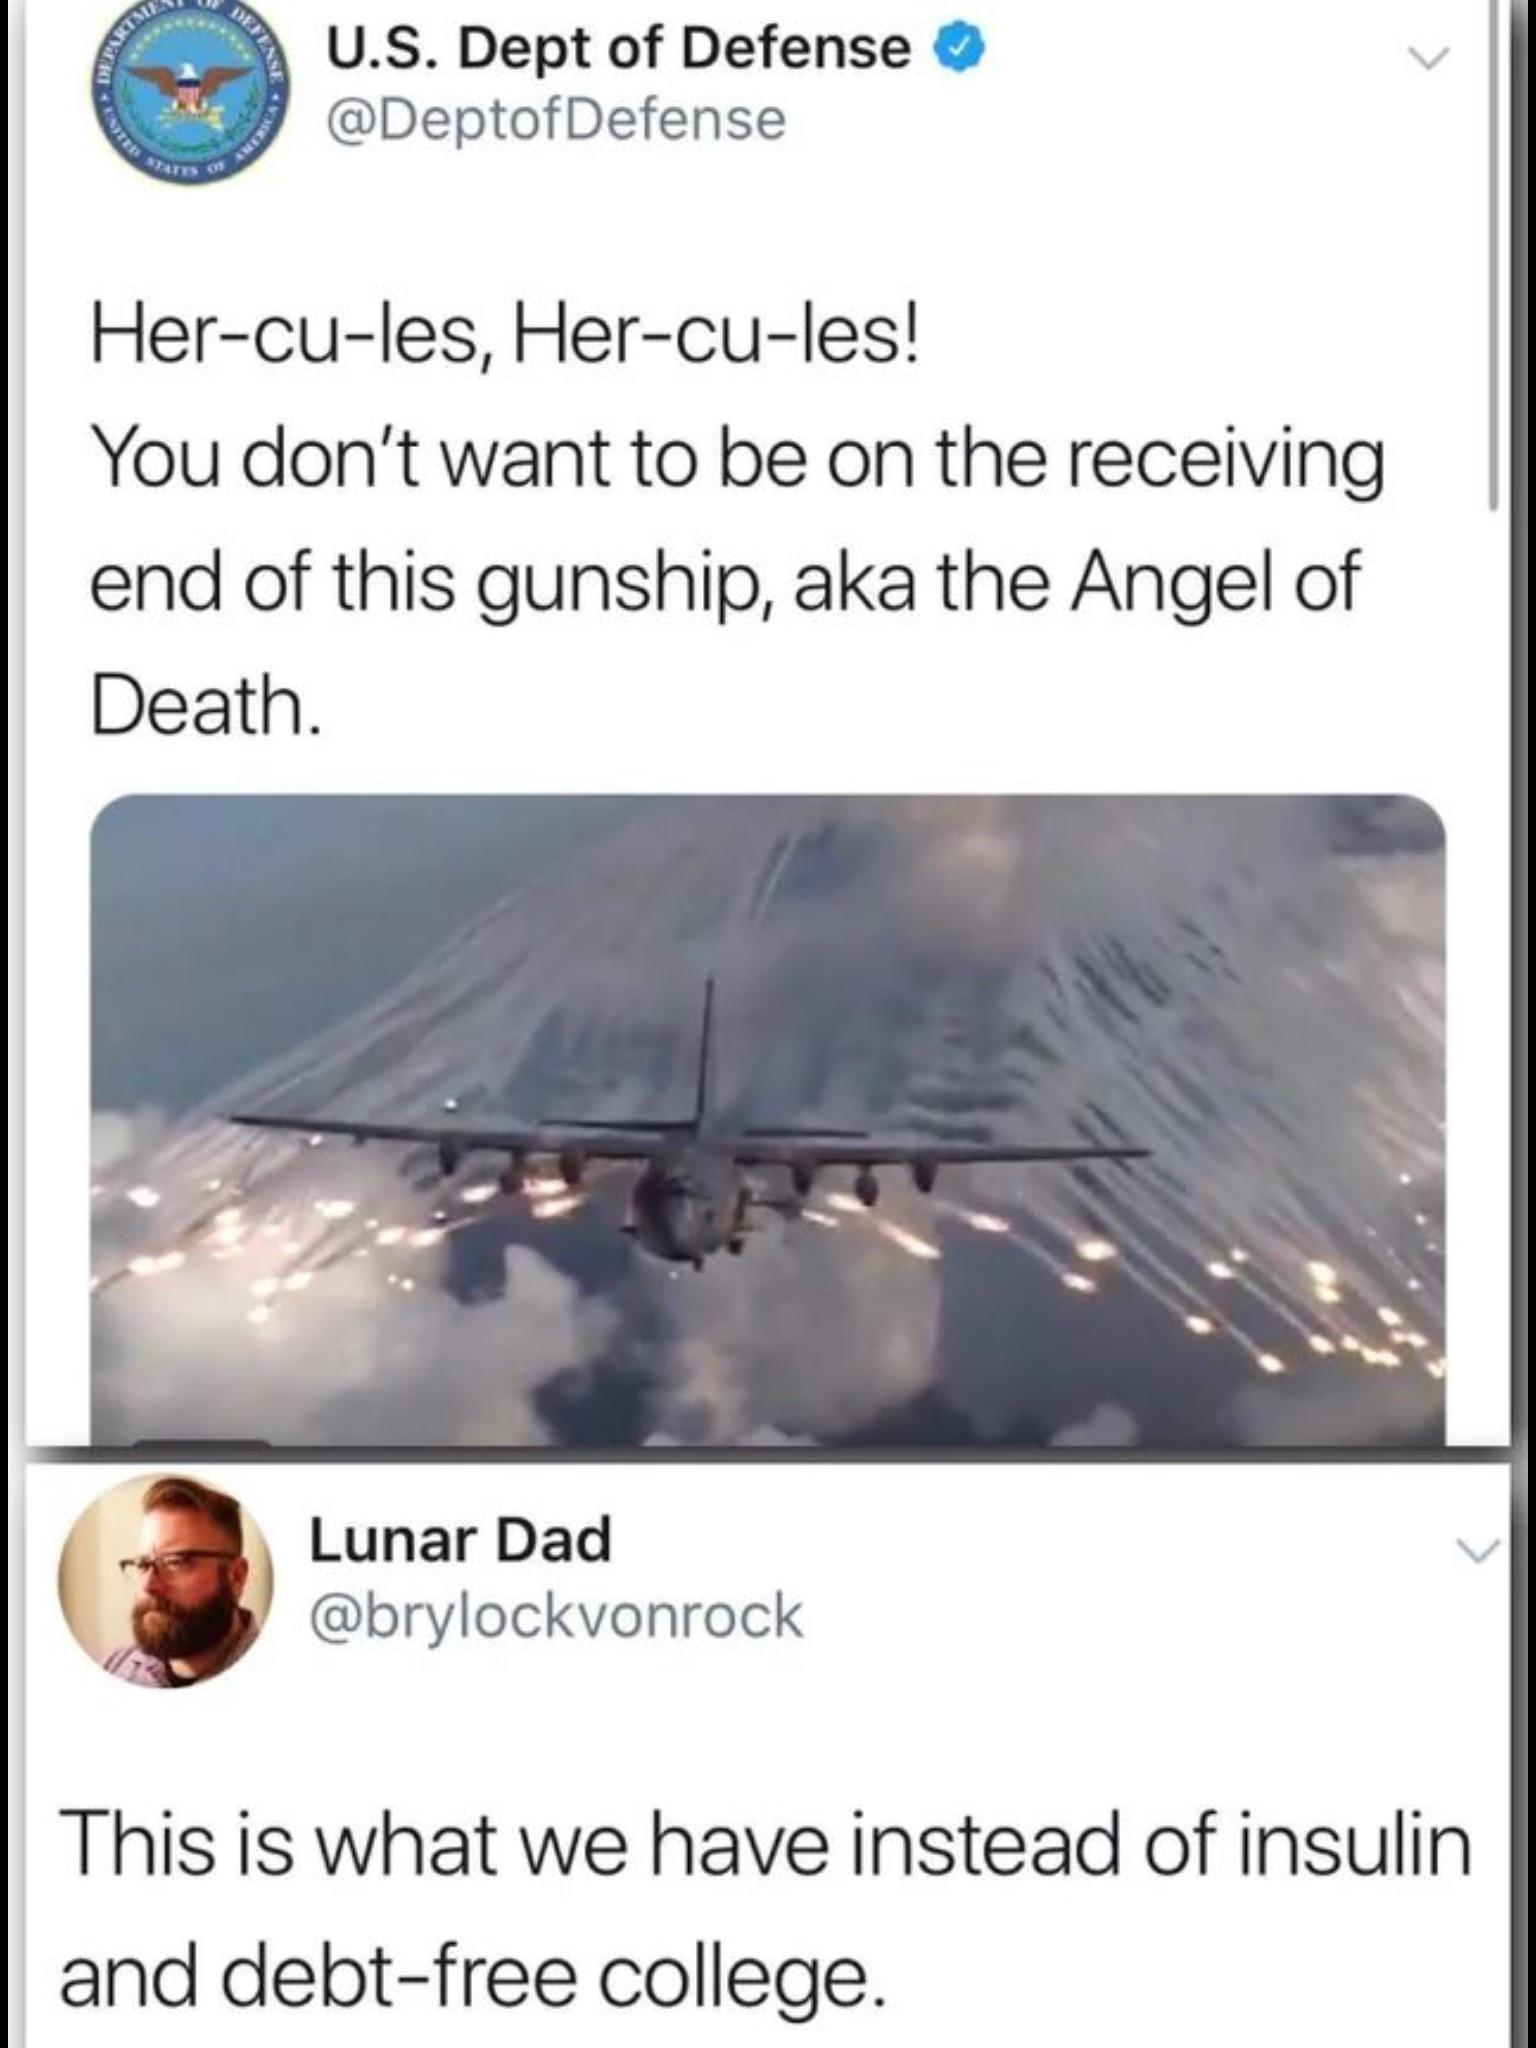 political political-memes political text: U.S. Dept of Defense @DeptofDefense Her-cu-les, Her-cu-les! You don't want to be on the receiving end of this gunship, aka the Angel of Death. Lunar Dad @brylockvonrock This is what we have instead of insulin and debt-free college. 